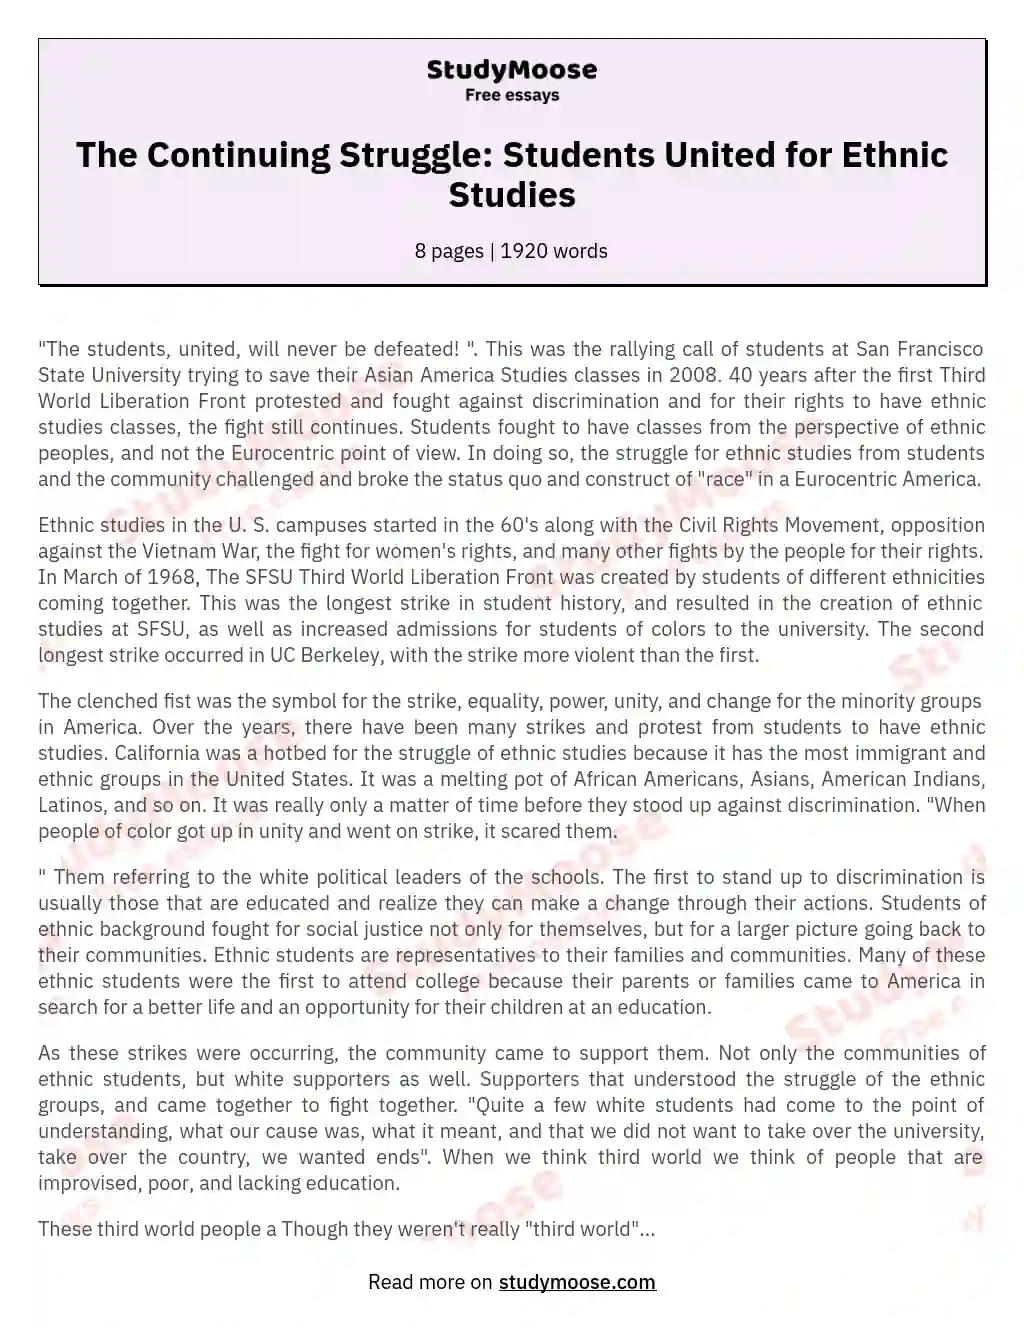 The Continuing Struggle: Students United for Ethnic Studies essay